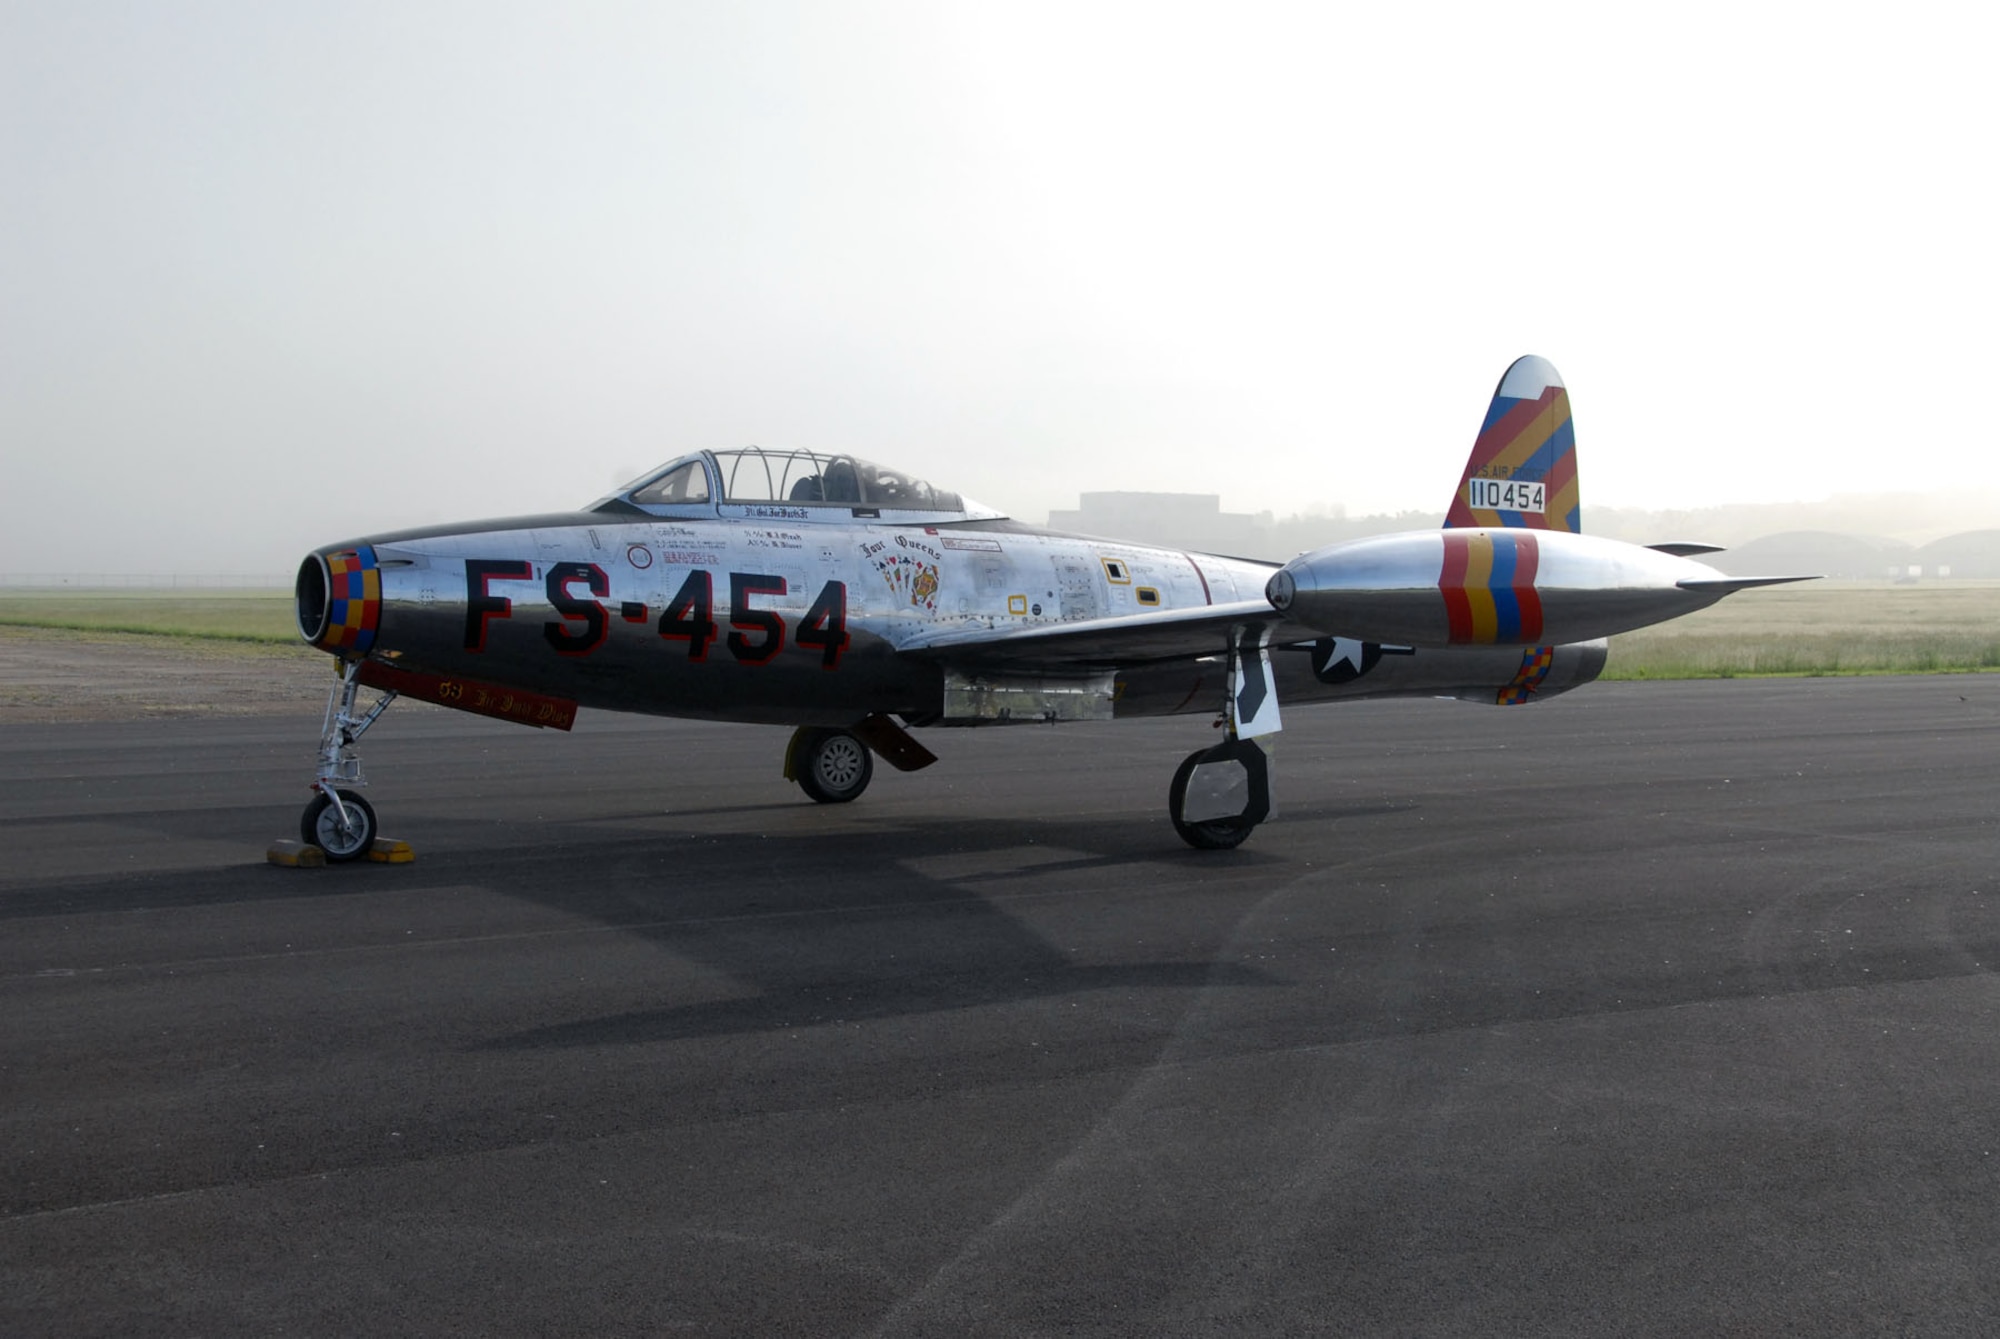 DAYTON, Ohio -- Republic F-84 Thunderjet at the National Museum of the United States Air Force. (U.S. Air Force photo)